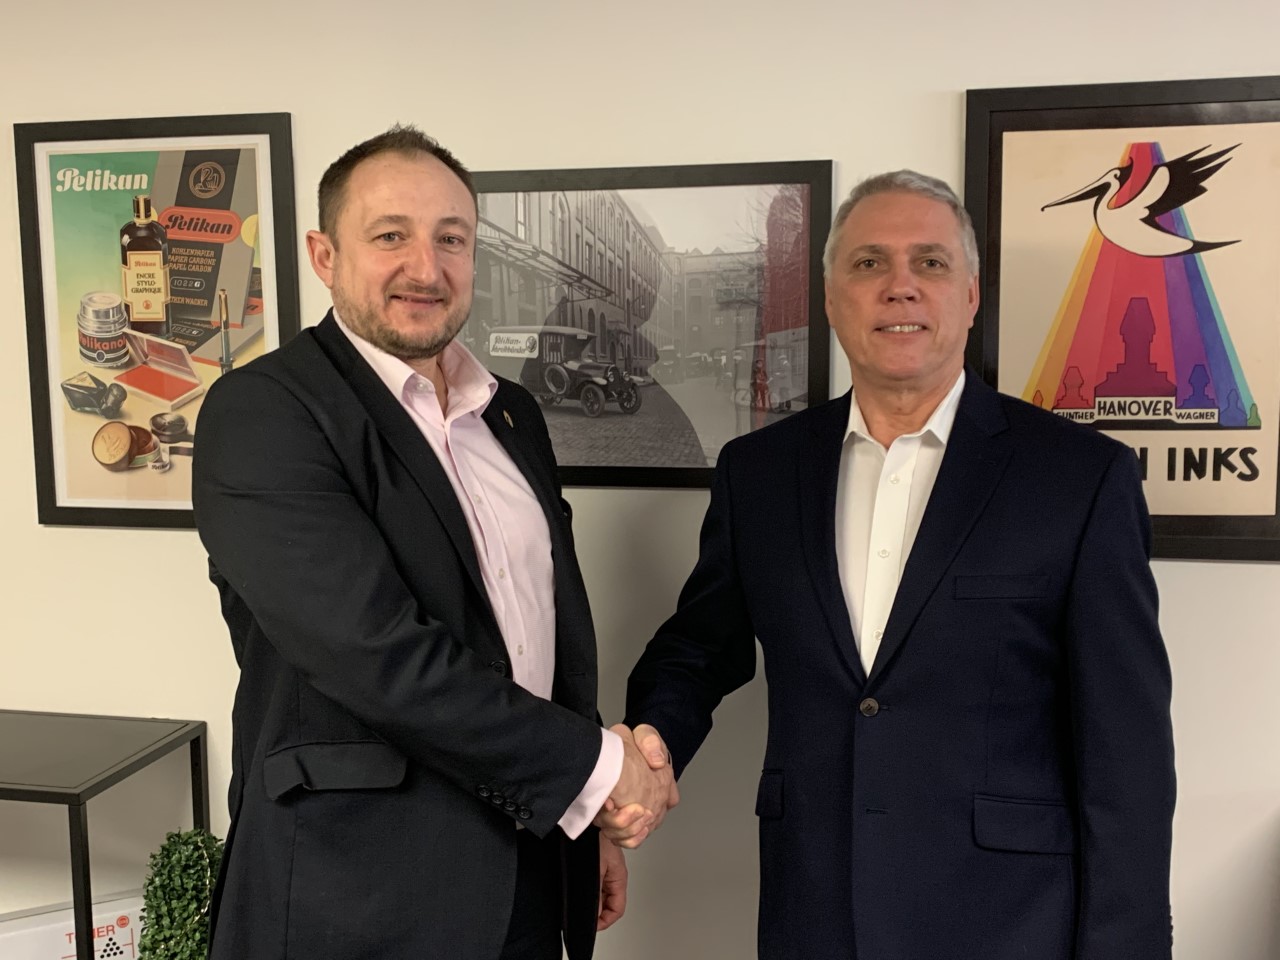 Pelikan partners with Synaxon UK - The Recycler - 30/01/2020